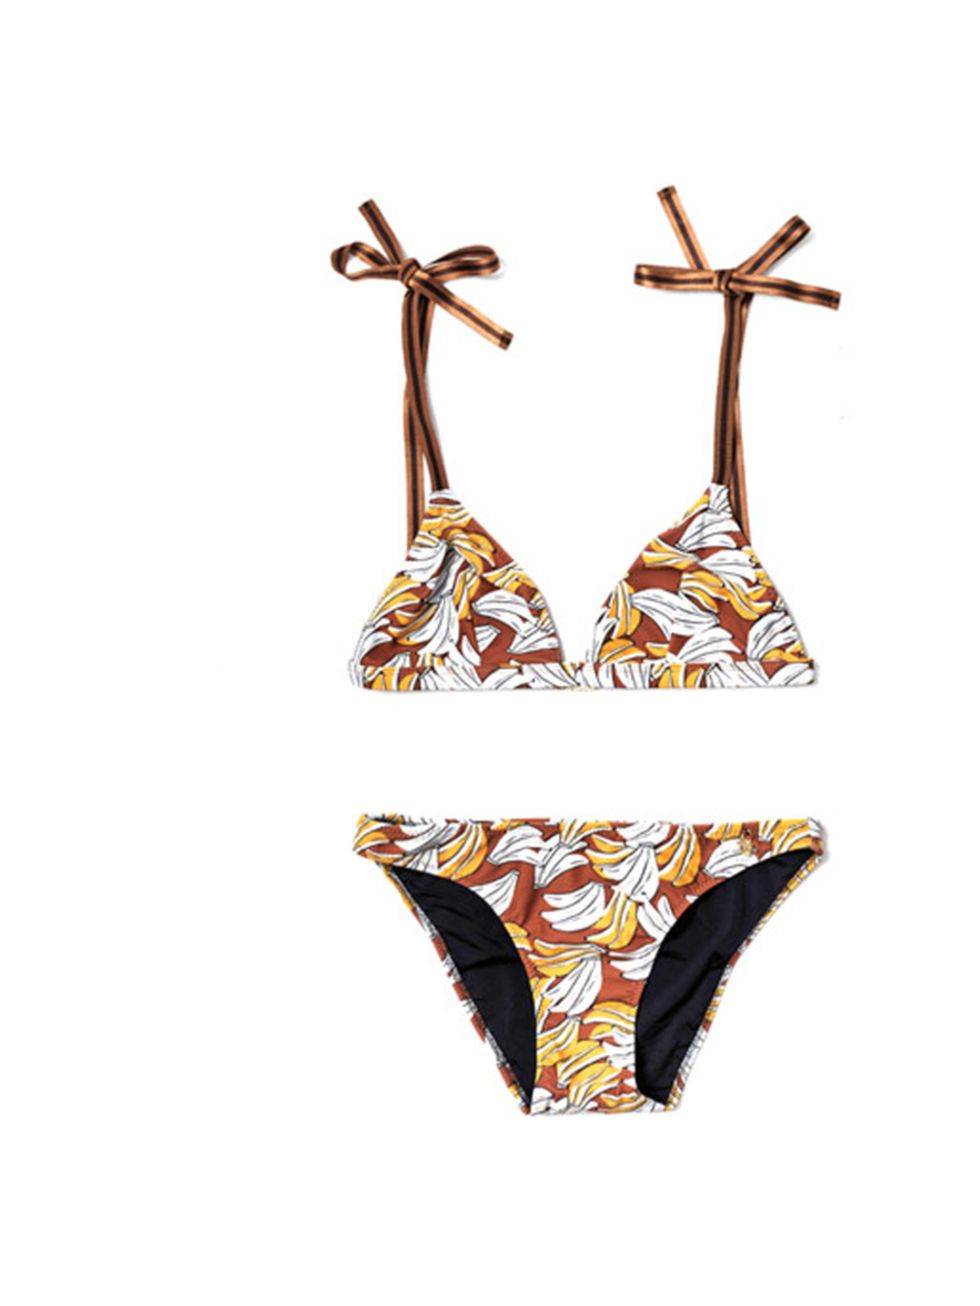 <p>Heading off for some last minute summer sun? Then make sure you pack some Anna &amp; Boy theyre super cute prints are our latest style crush Anna &amp; Boy banana print bikini, £190, at Matches</p><p><a href="http://shopping.elleuk.com/browse?fts=ann